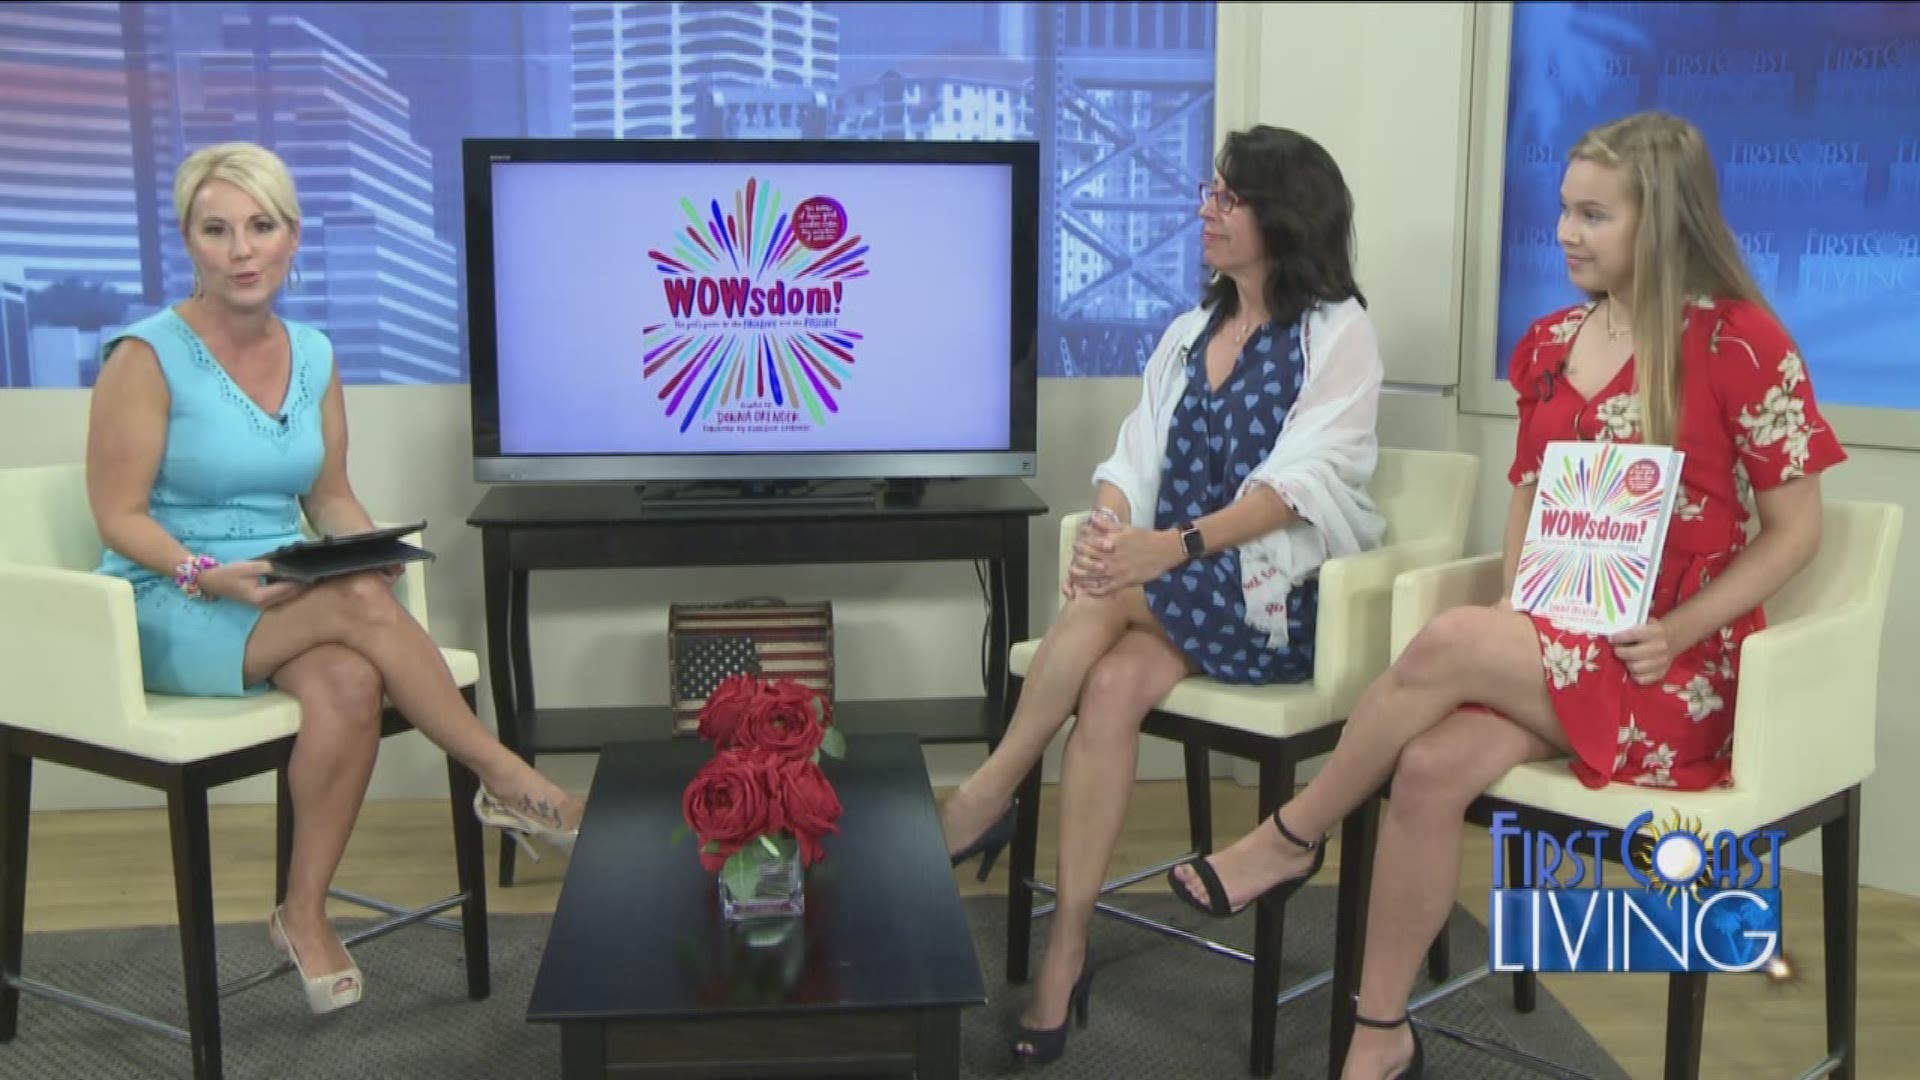 Donna Orender and Grace Freedman talk about her new book Wowsdom!